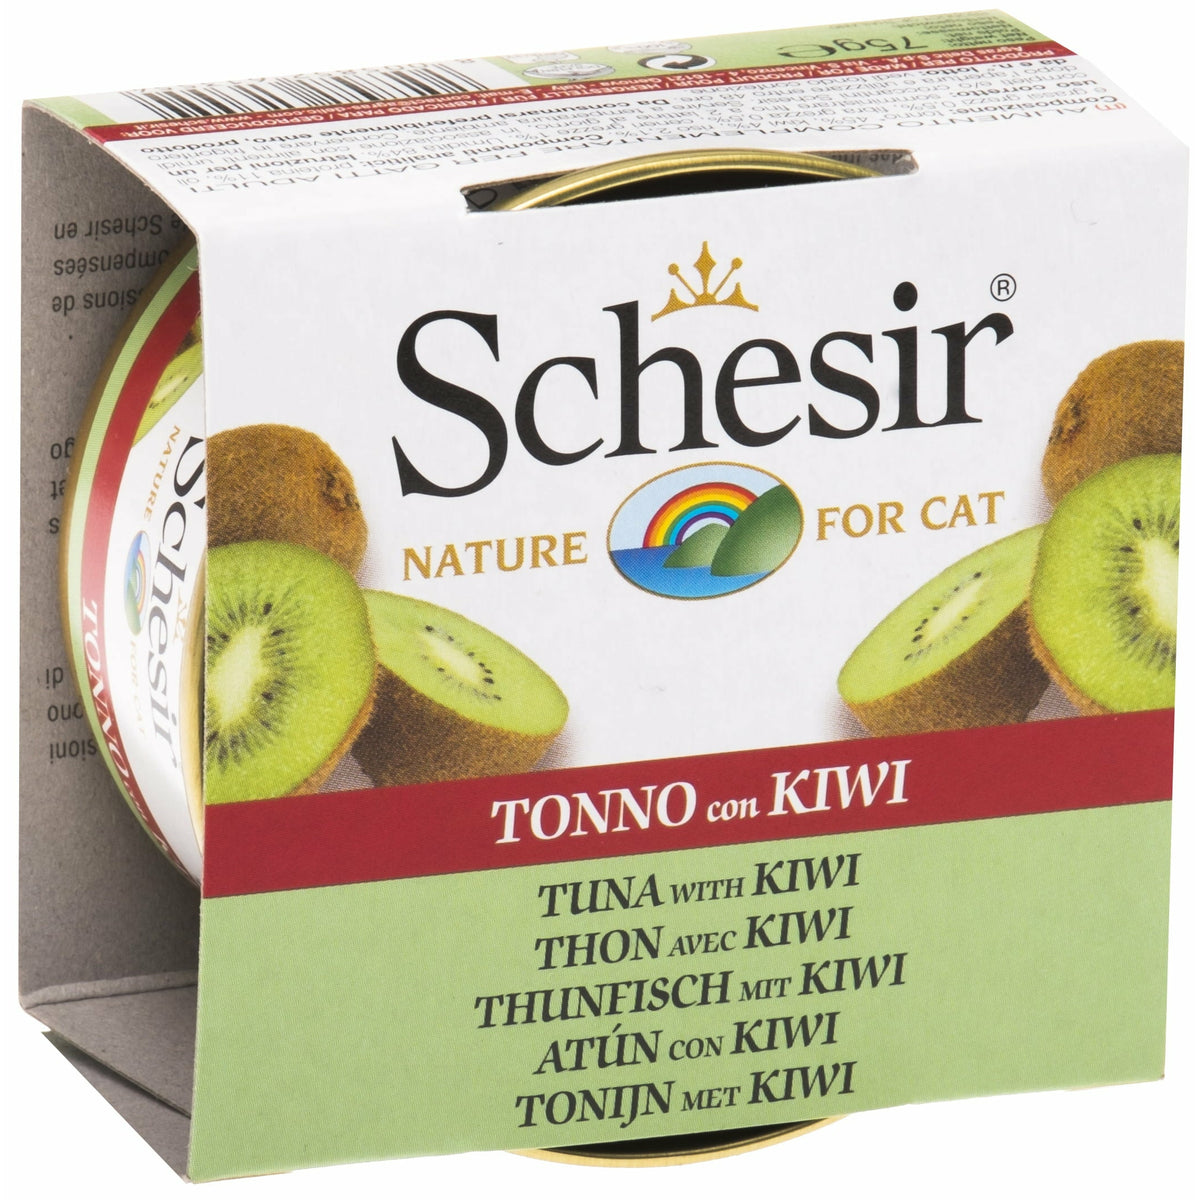 Schesir Tuna with Kiwi (75g) - Wet Canned Cat Food